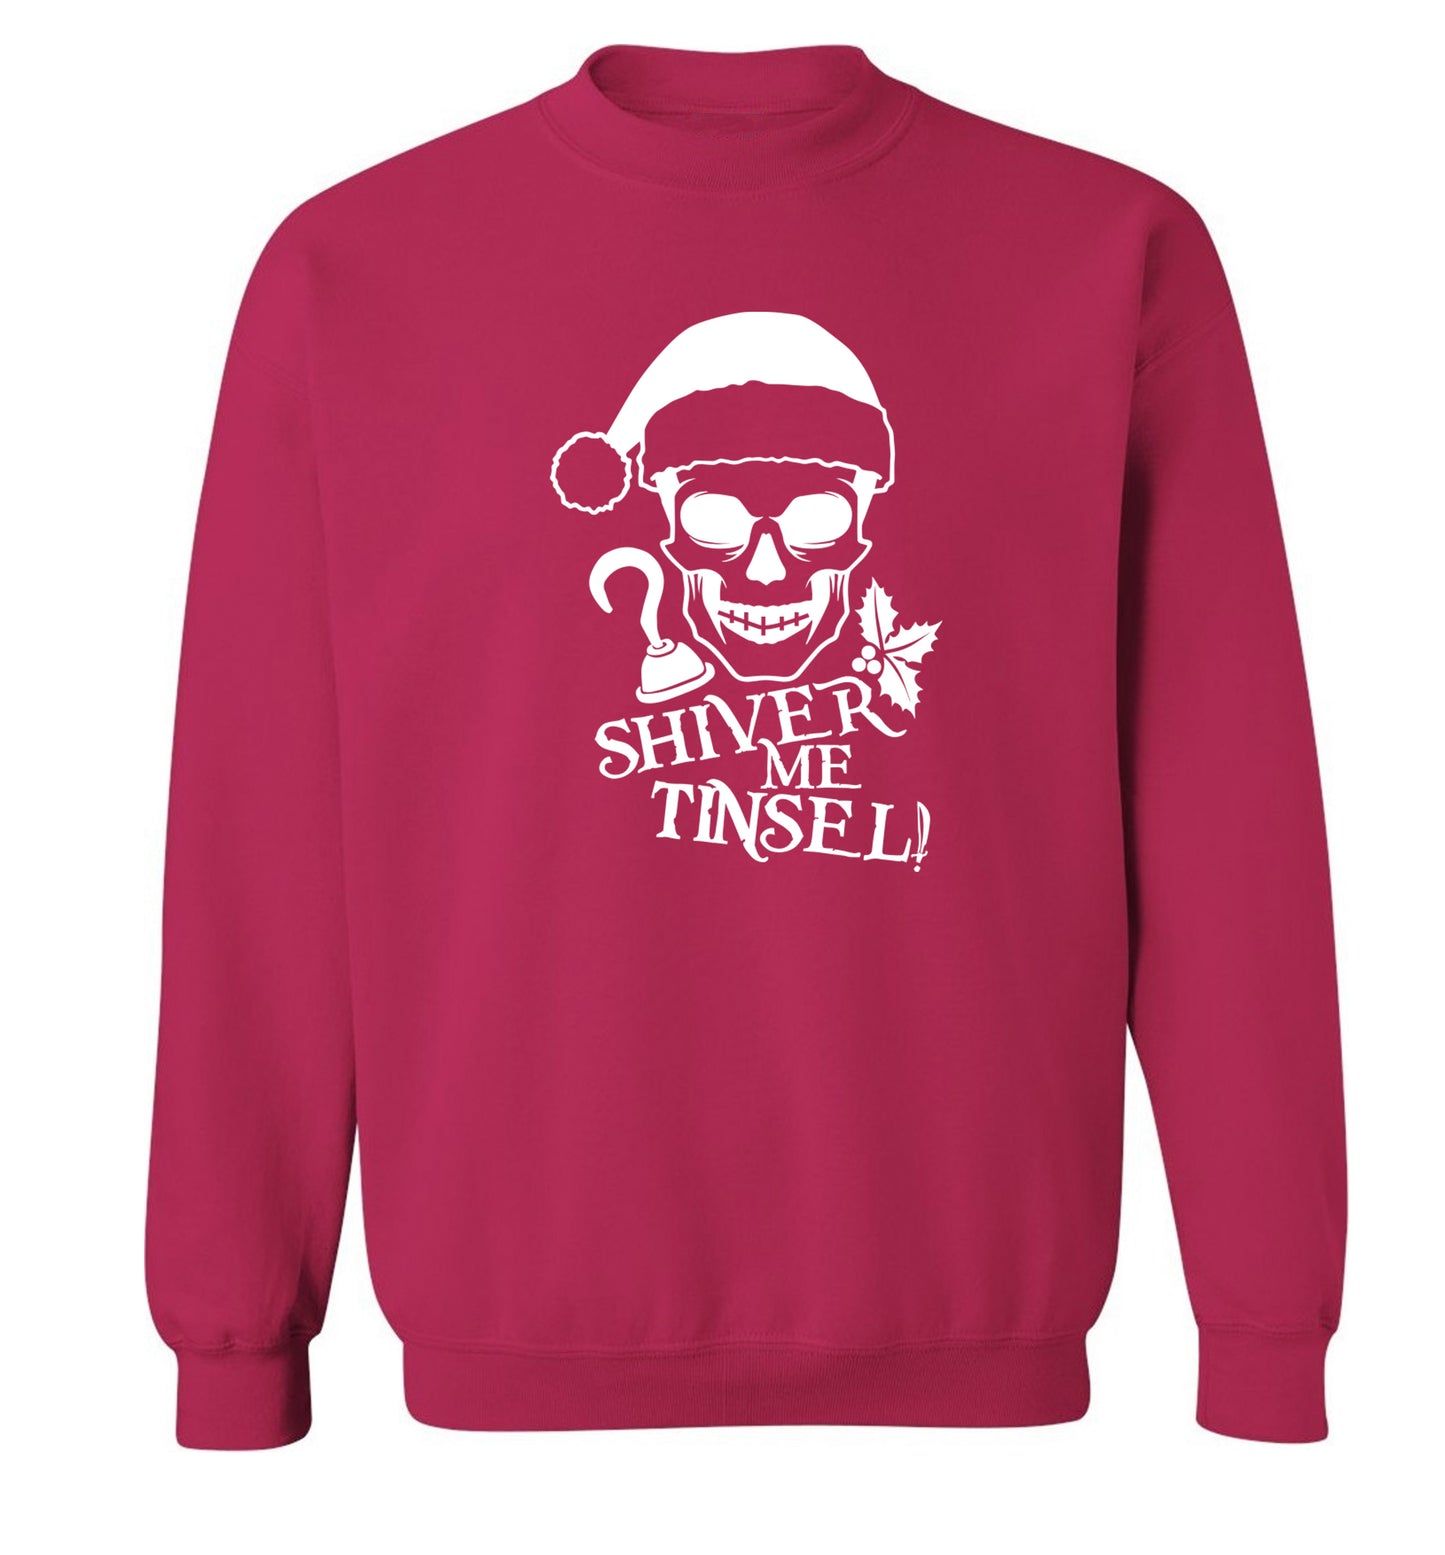 Shiver me tinsel Adult's unisex pink Sweater 2XL